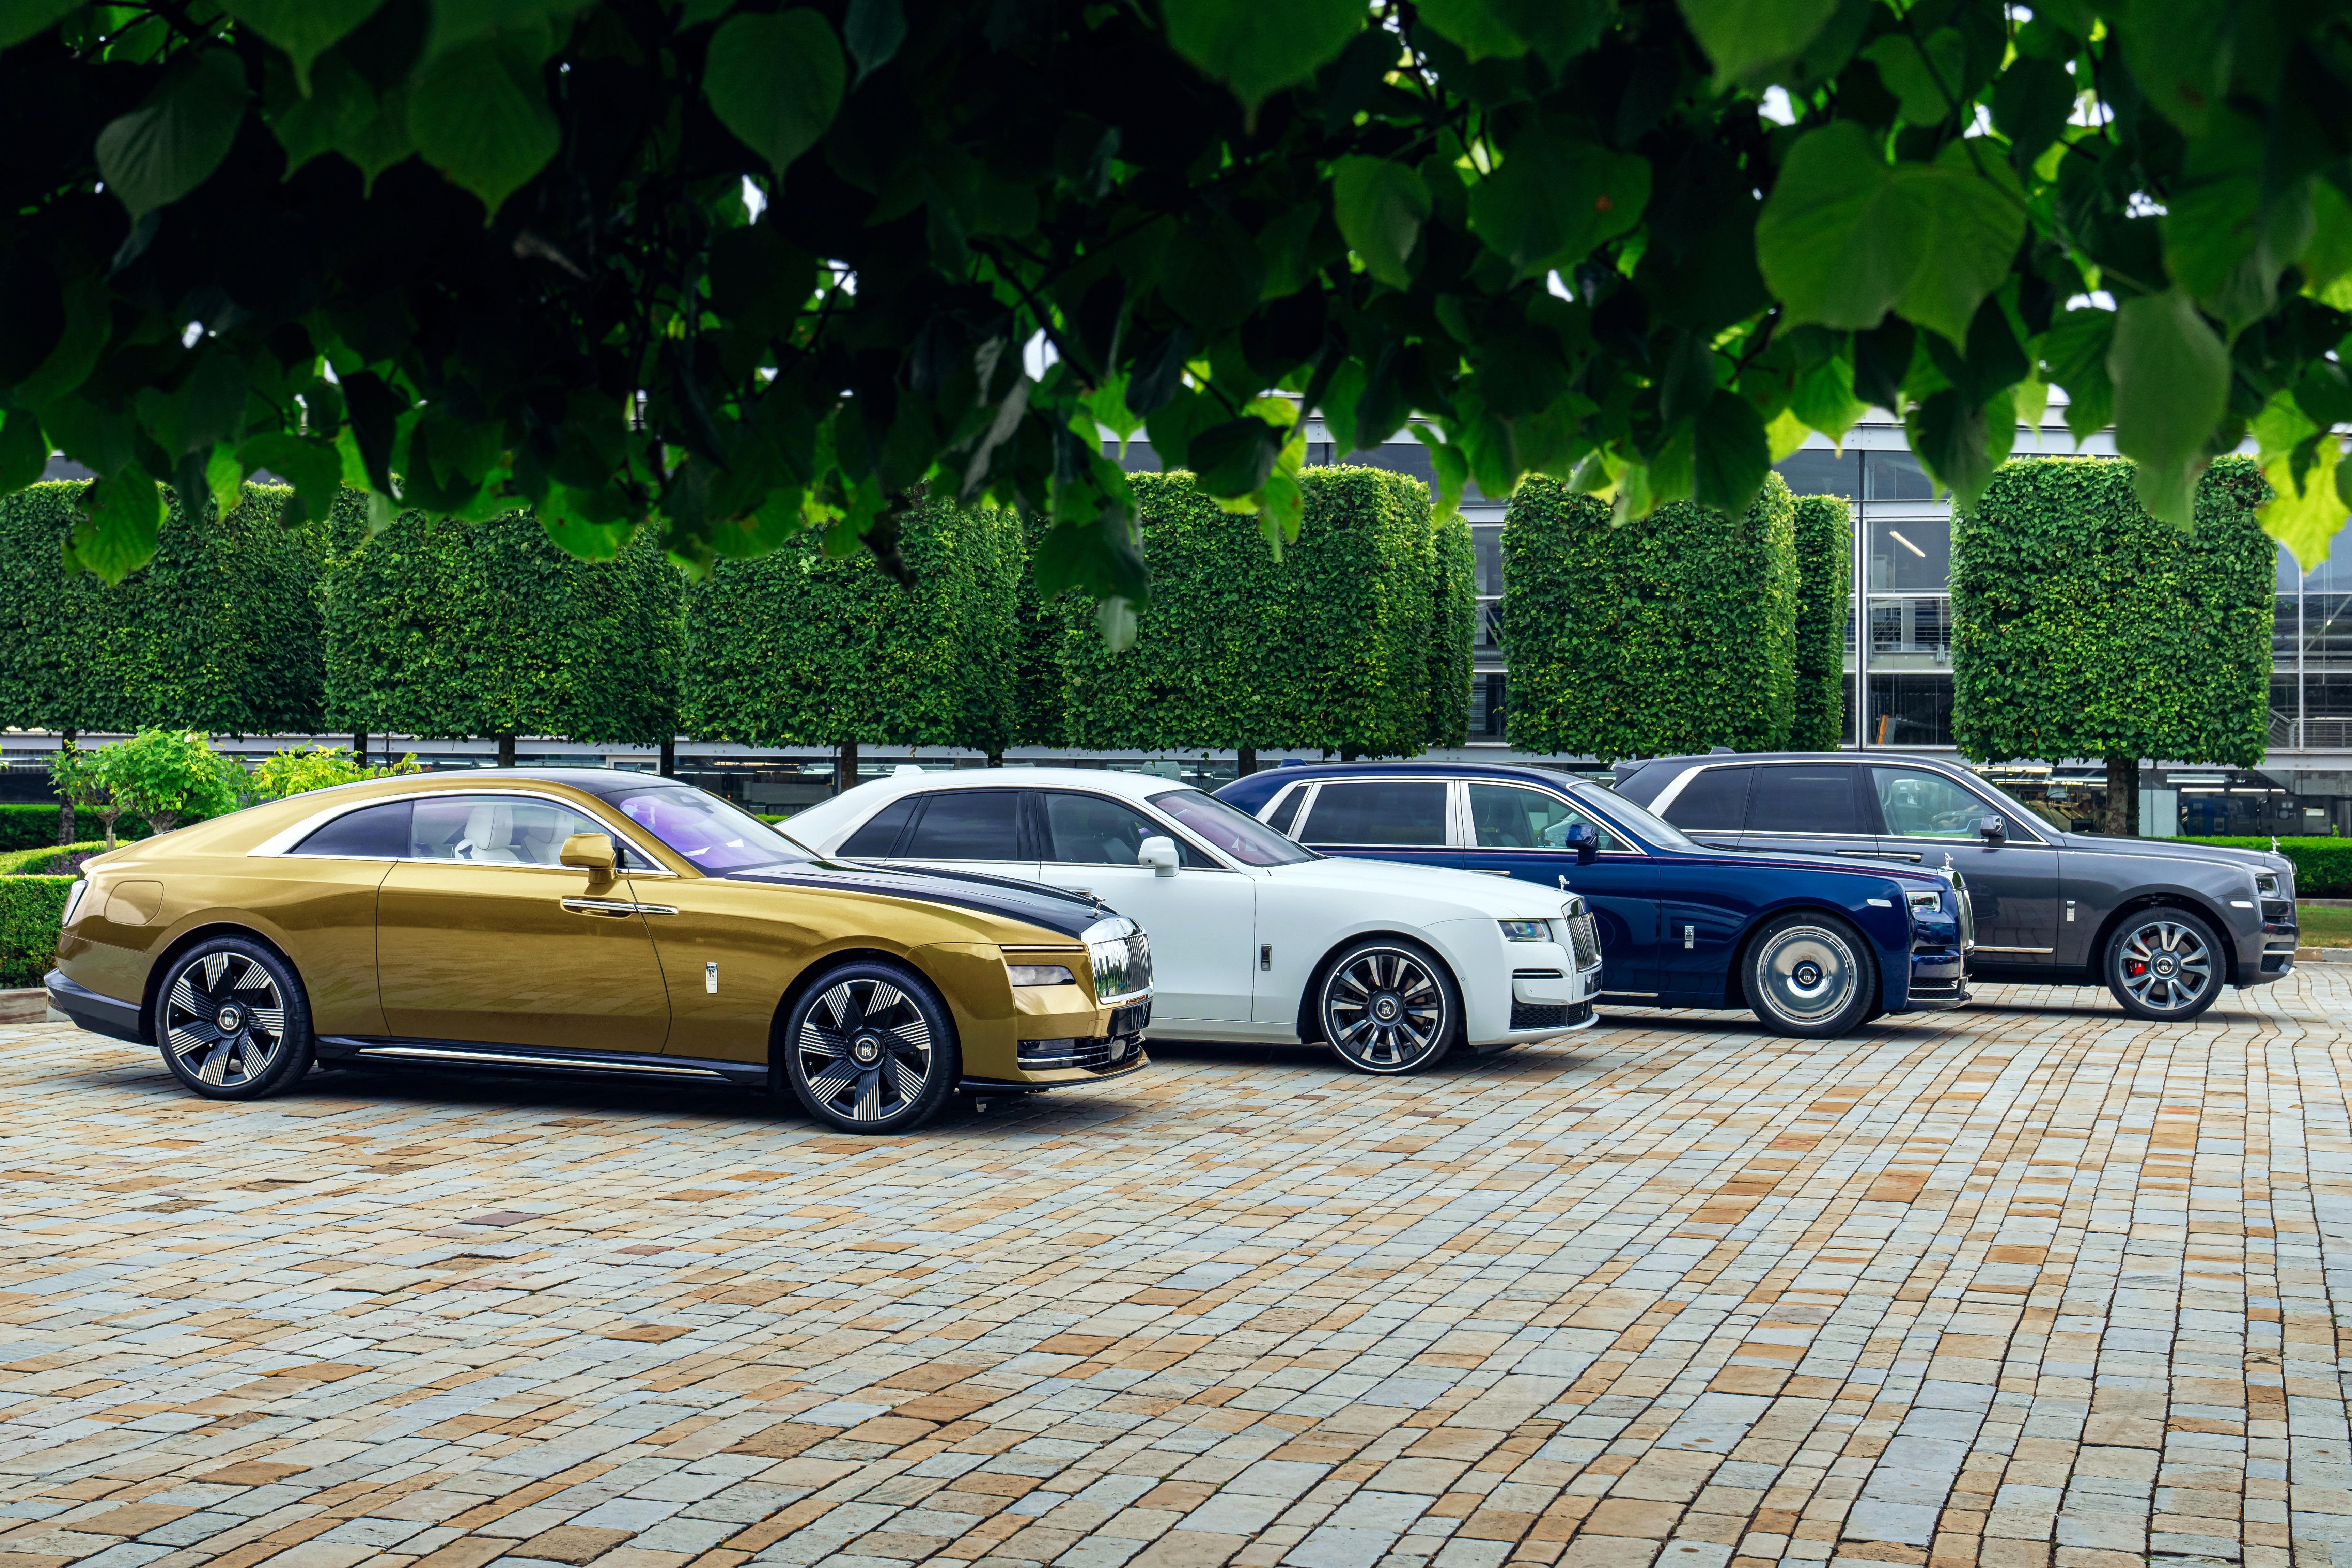 Rolls-Royce marks 20 years of Goodwood production with bespoke creations |  CarExpert